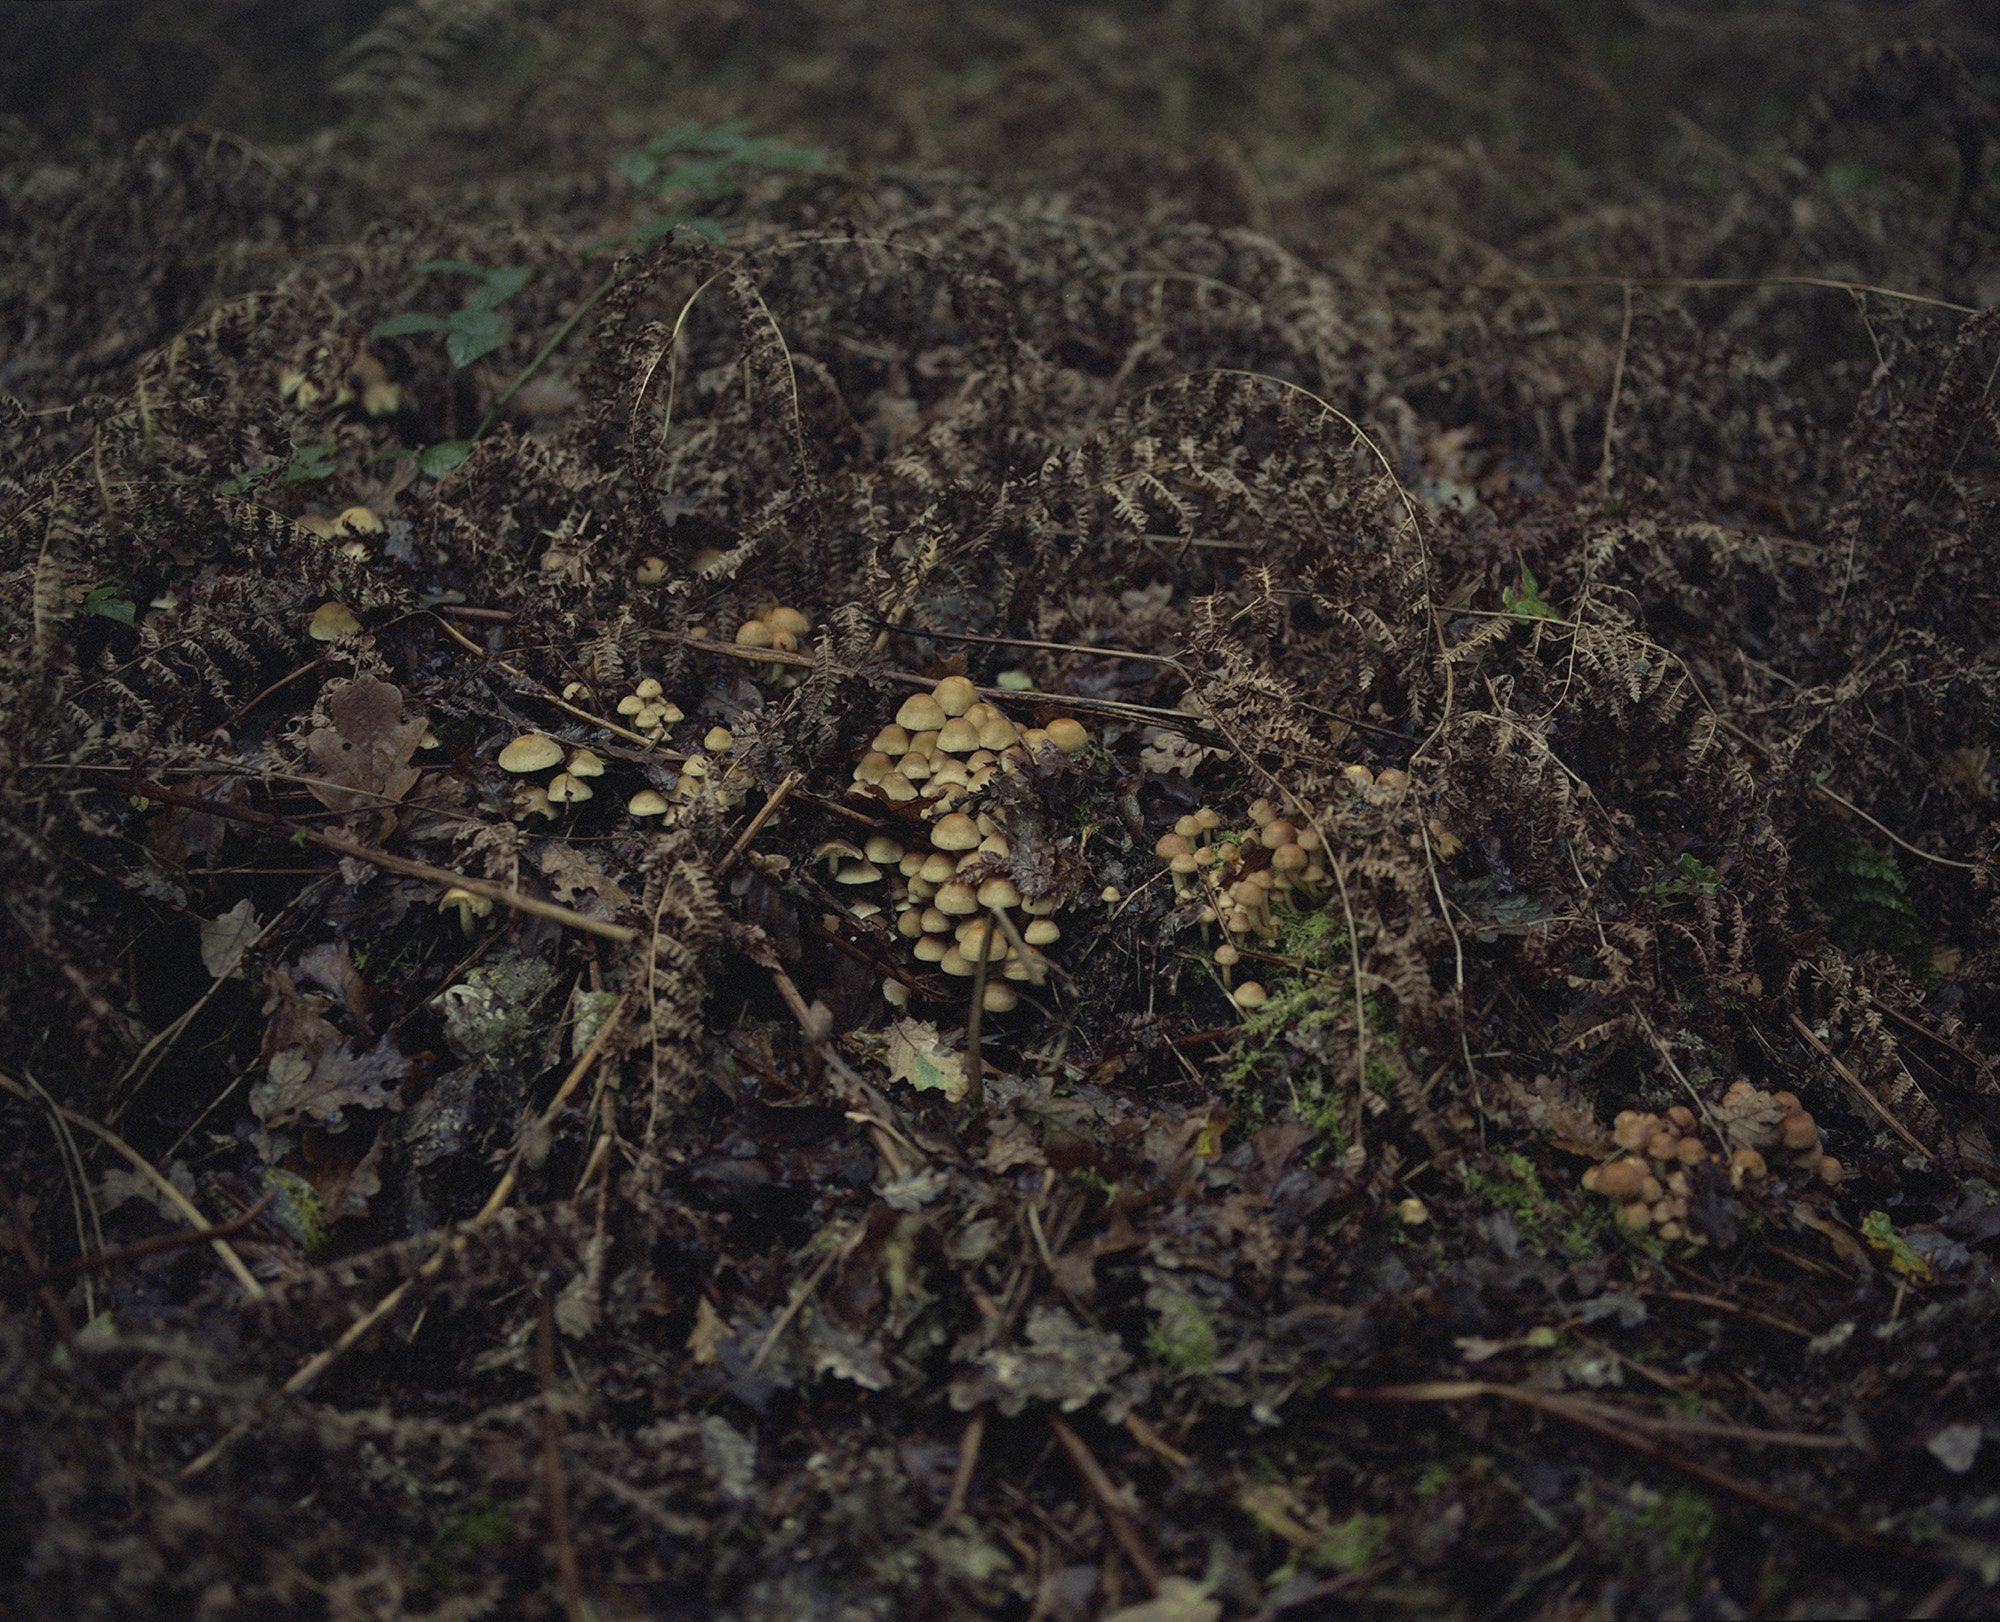 Clare+Hewitt,+Fungi+at+The+Birmingham+Institute+of+Forest+Research,+from+the+series+_Everything+in+the+forest+is+the+forest_.jpeg